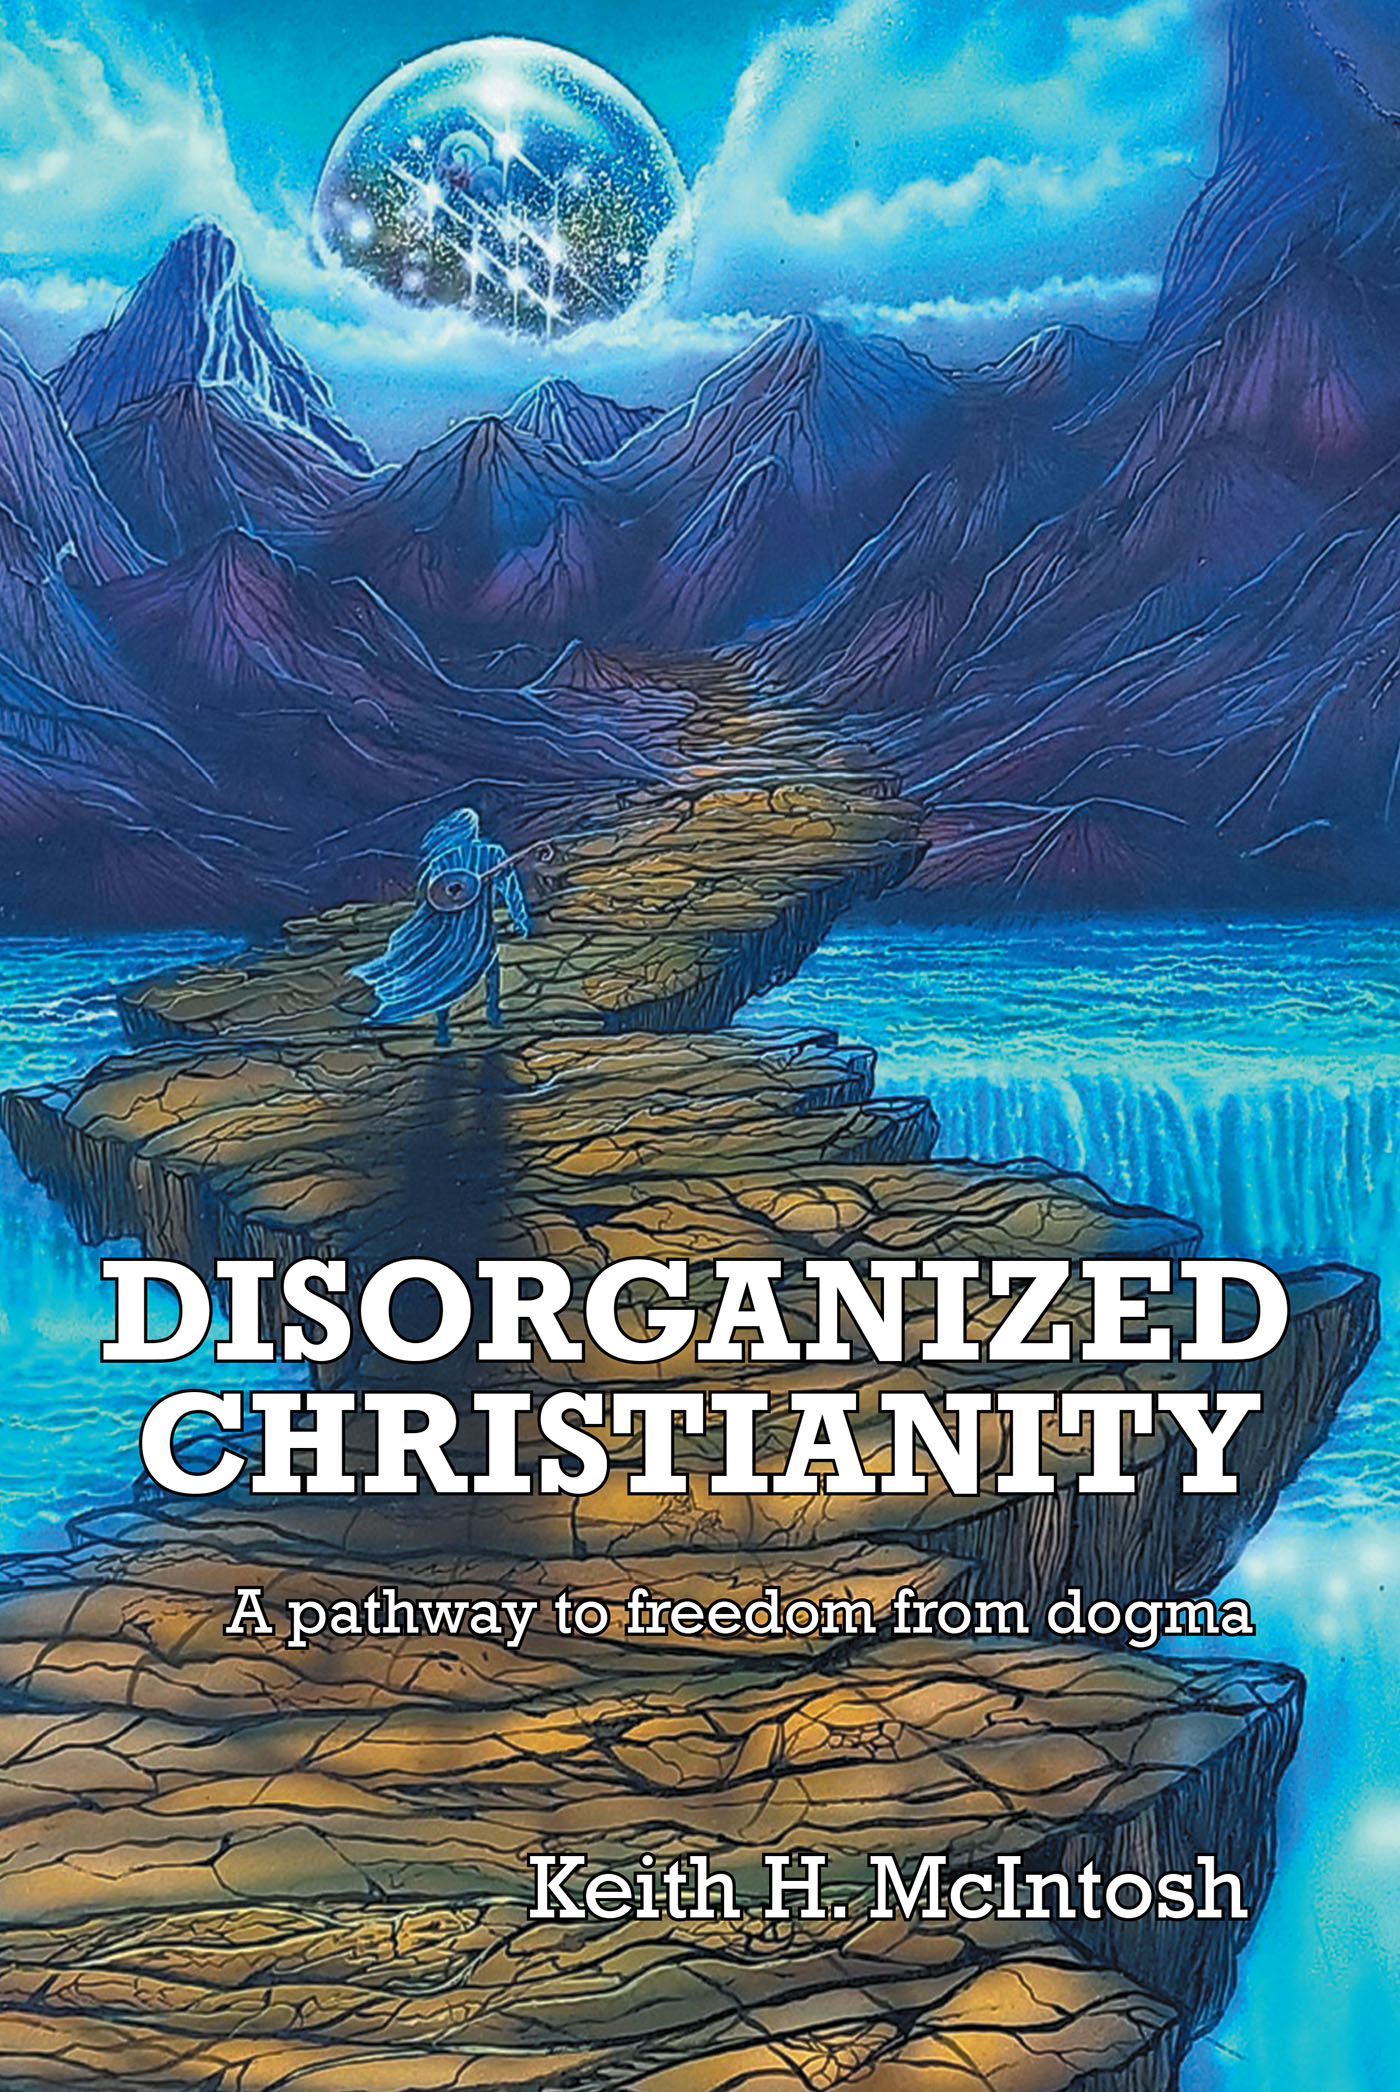 Author Keith H. McIntosh’s New Book, “Disorganized Christianity,” Takes a Look at How Christianity Has Been Used to Manipulate and Condemn People Throughout History